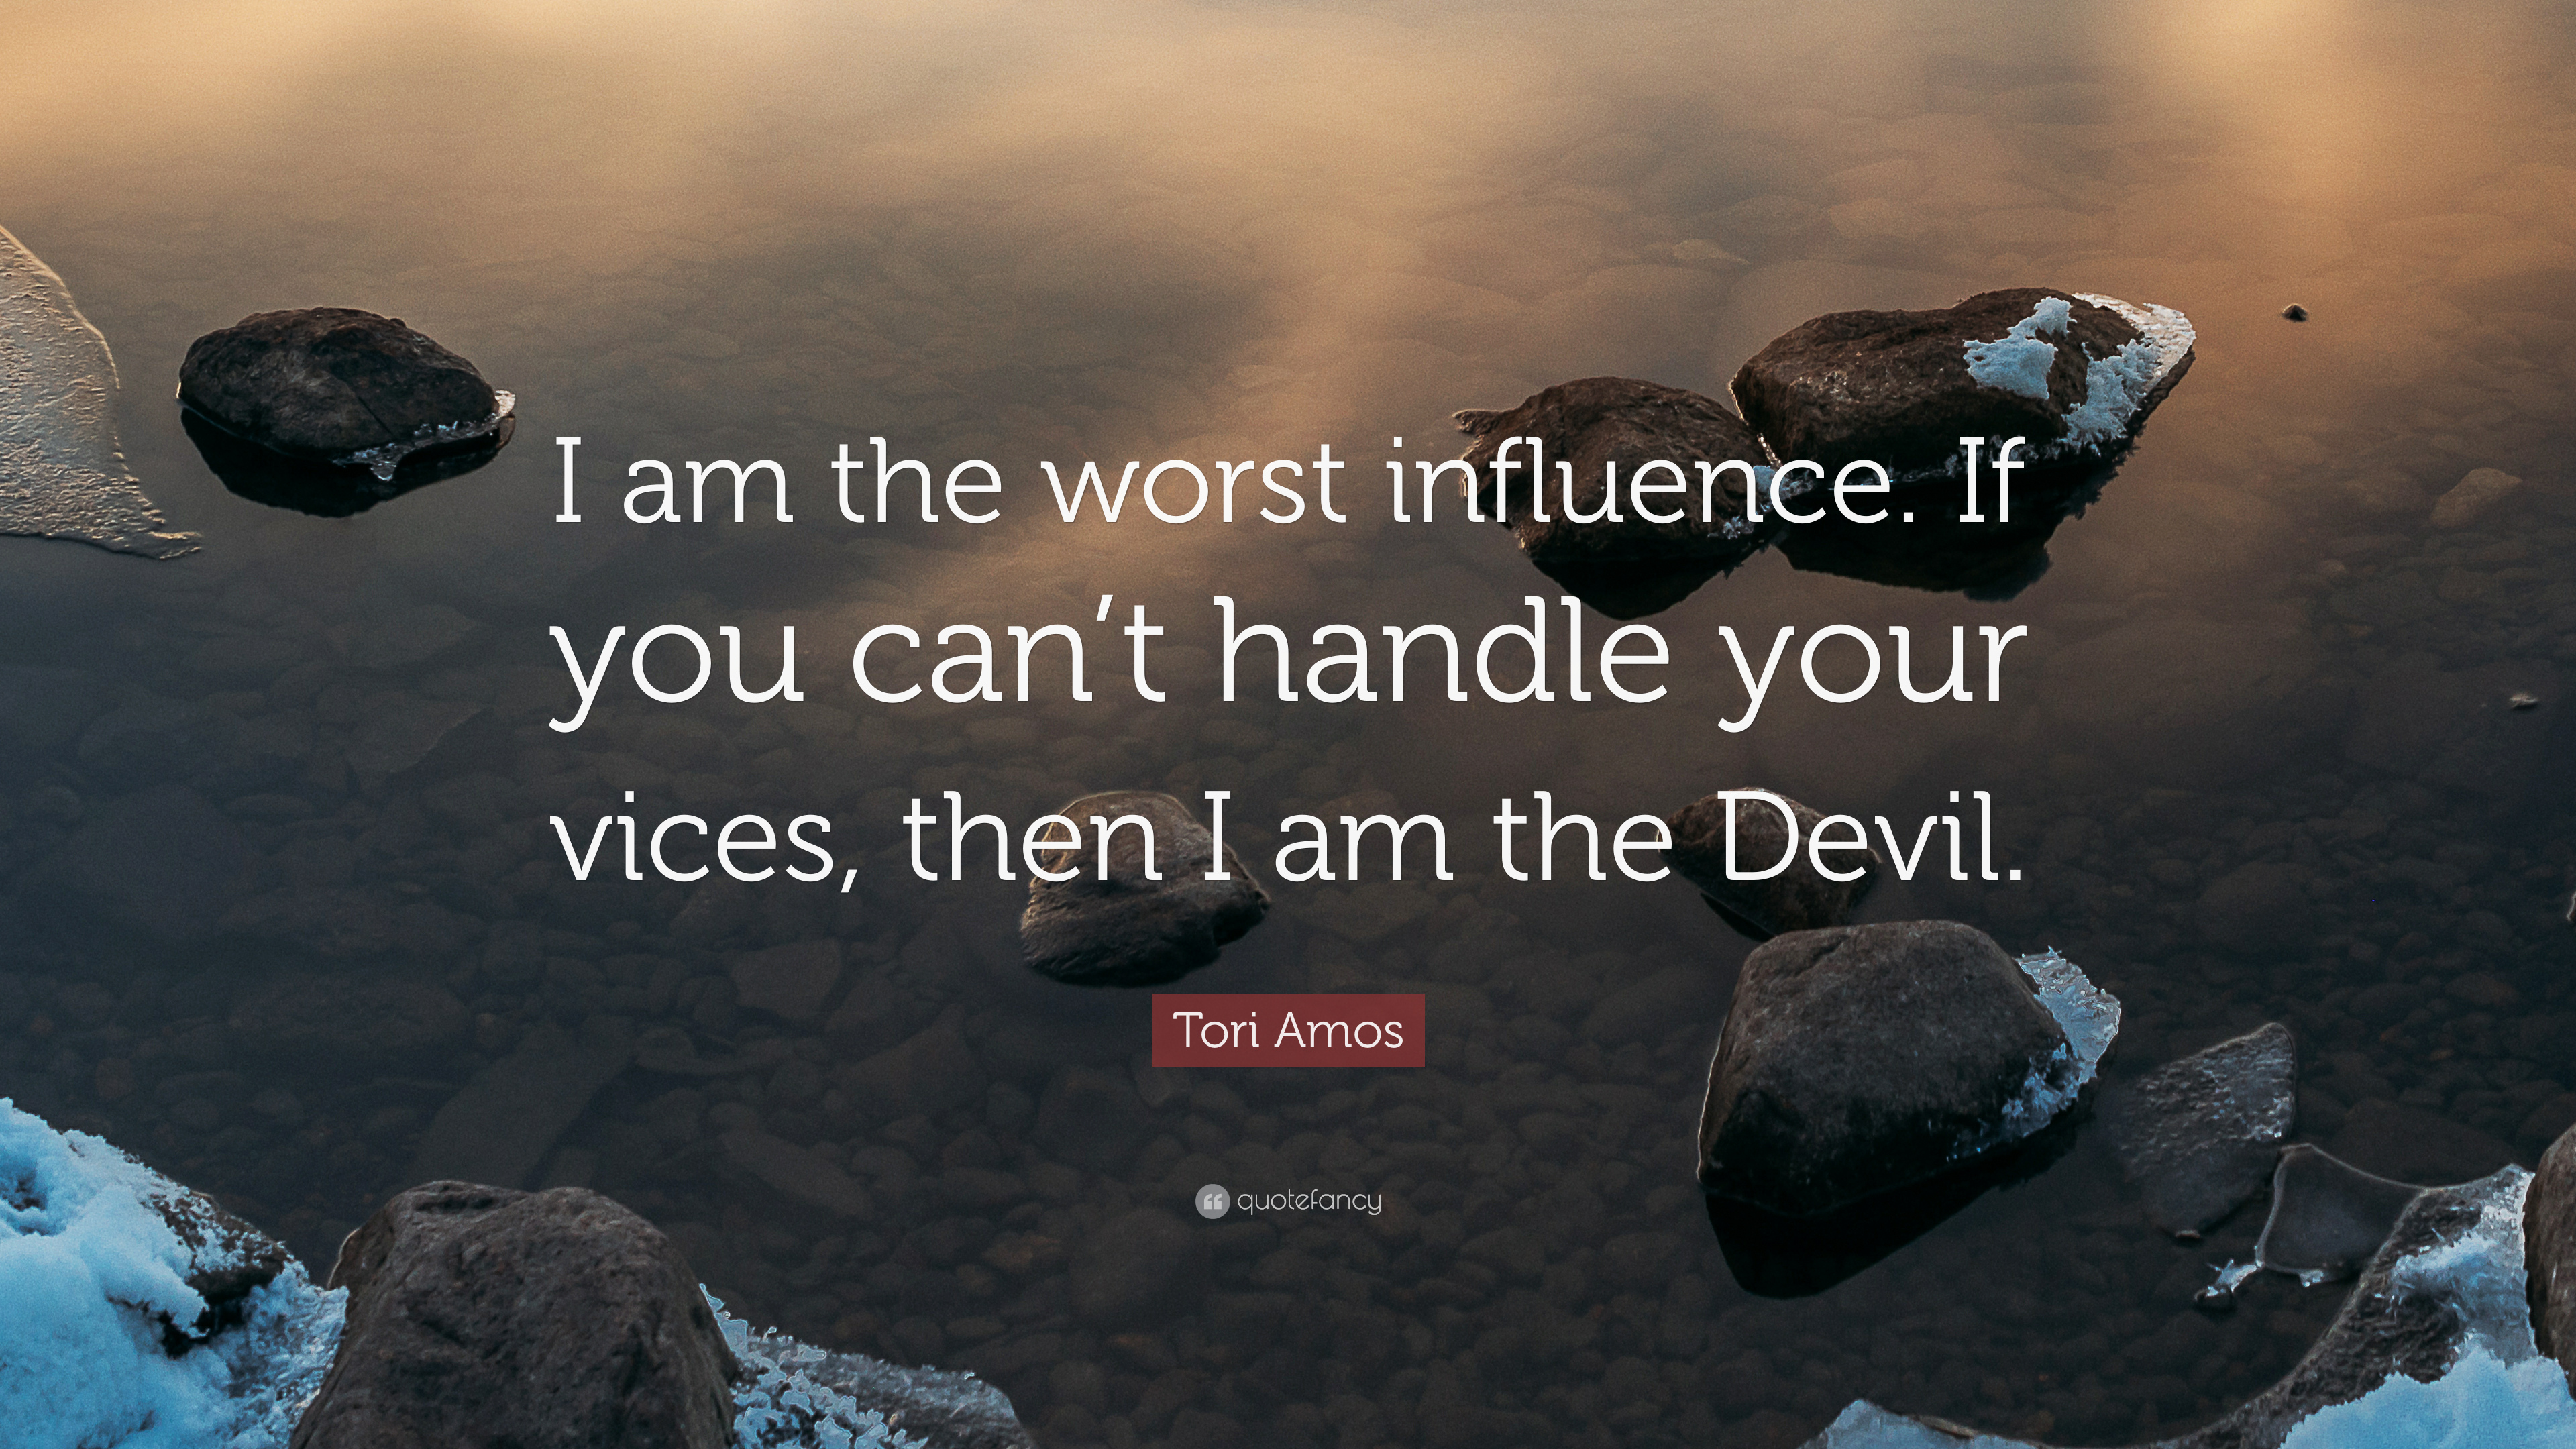 Tori Amos Quote: “I am the worst influence. If you can't handle your vices, then